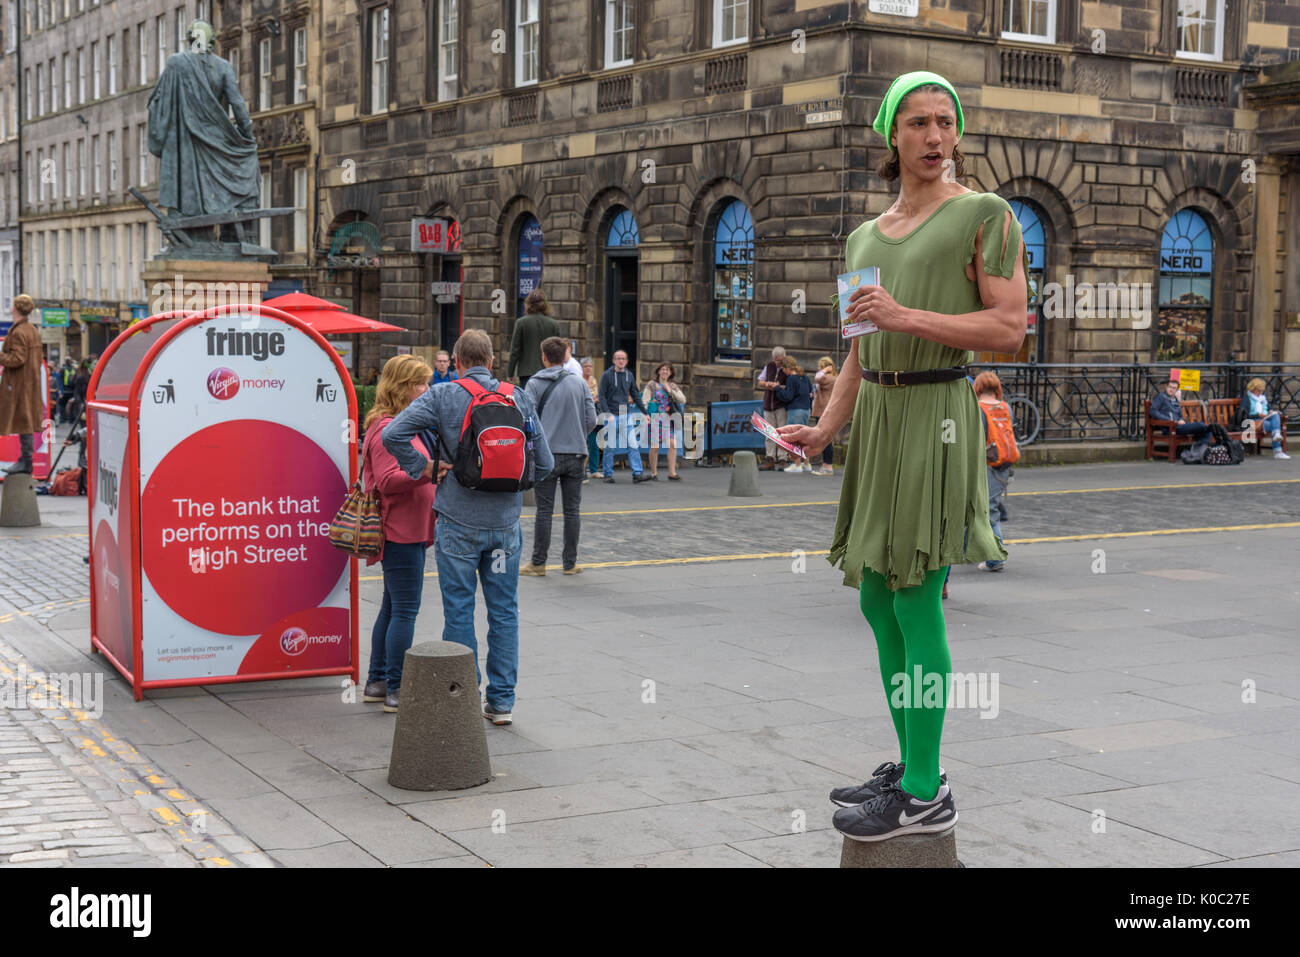 EDINBURGH, UNITED KINGDOM - AUGUST 16, 2017 - A boy advertises a theatrical performance along the Royal Mile of Edinburgh during the 70th anniversary  Stock Photo